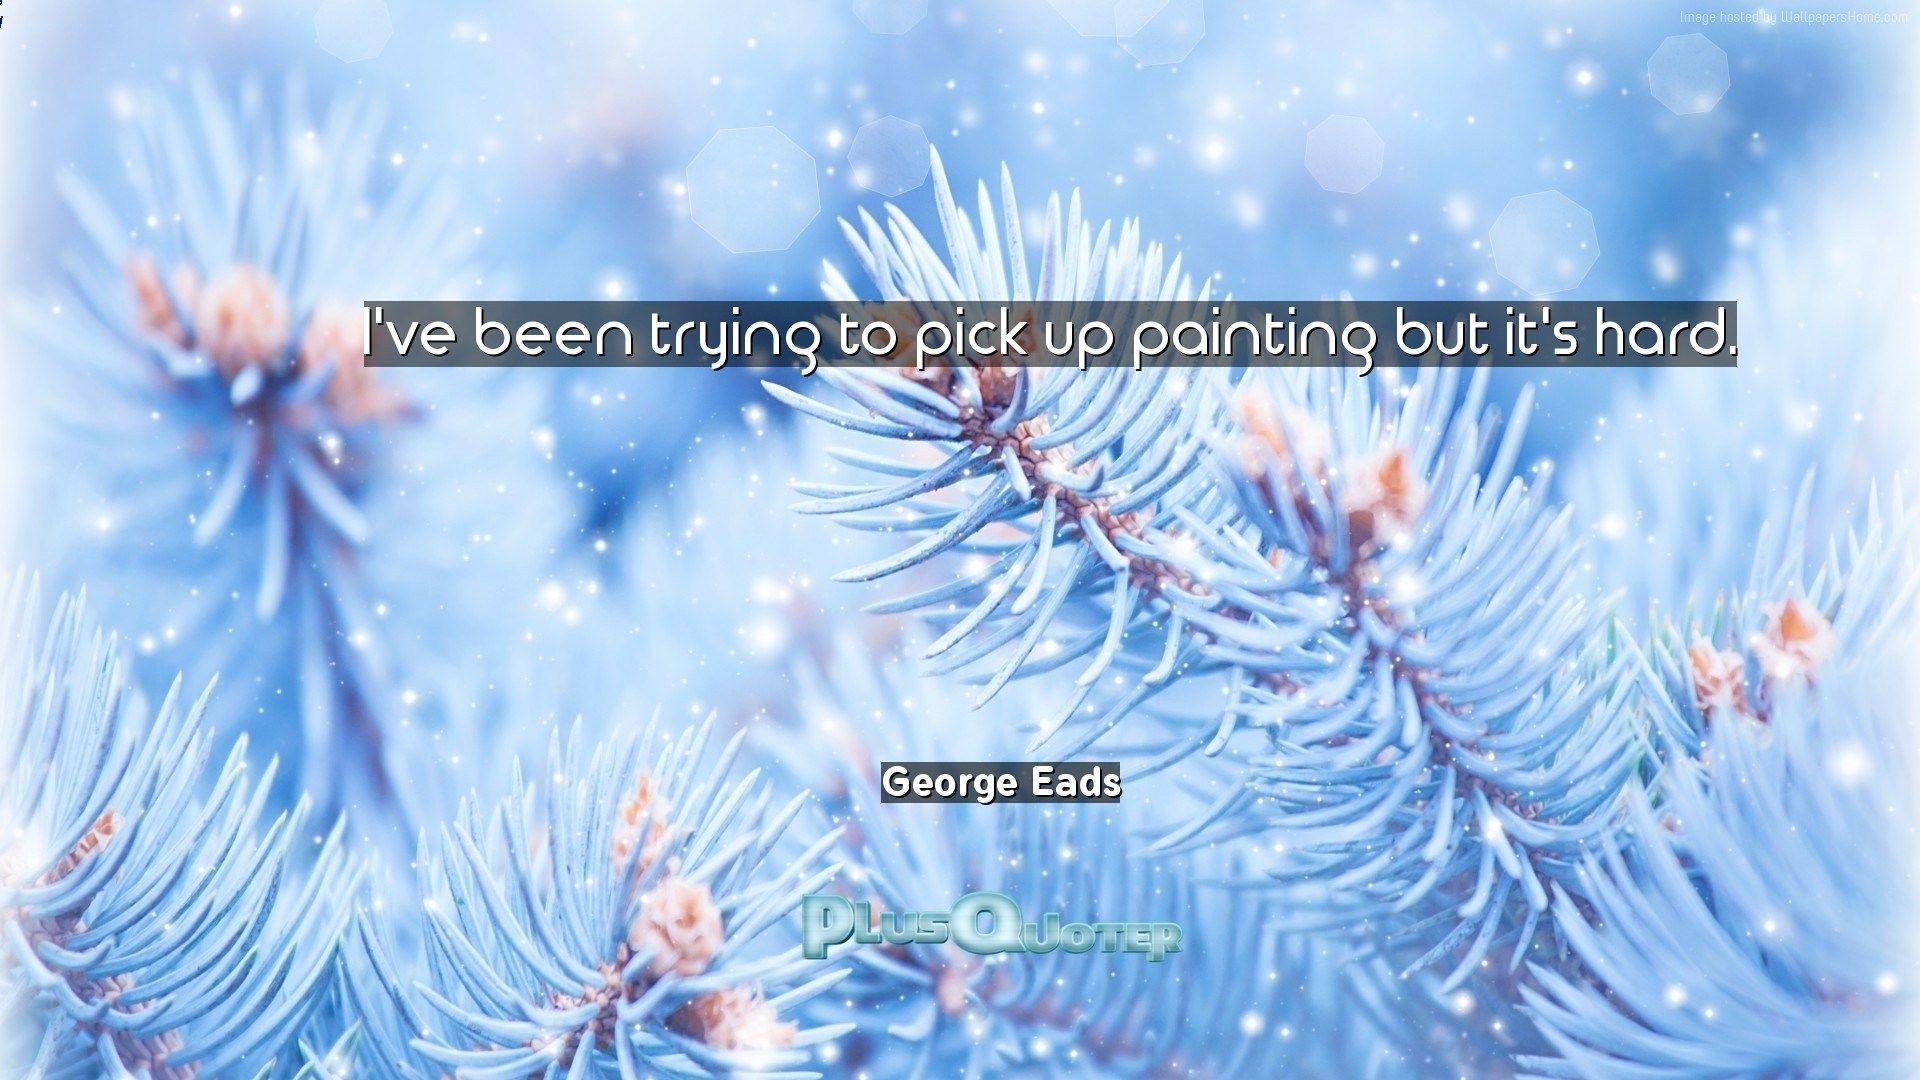 I've been trying to pick up painting but it's hard- George Eads